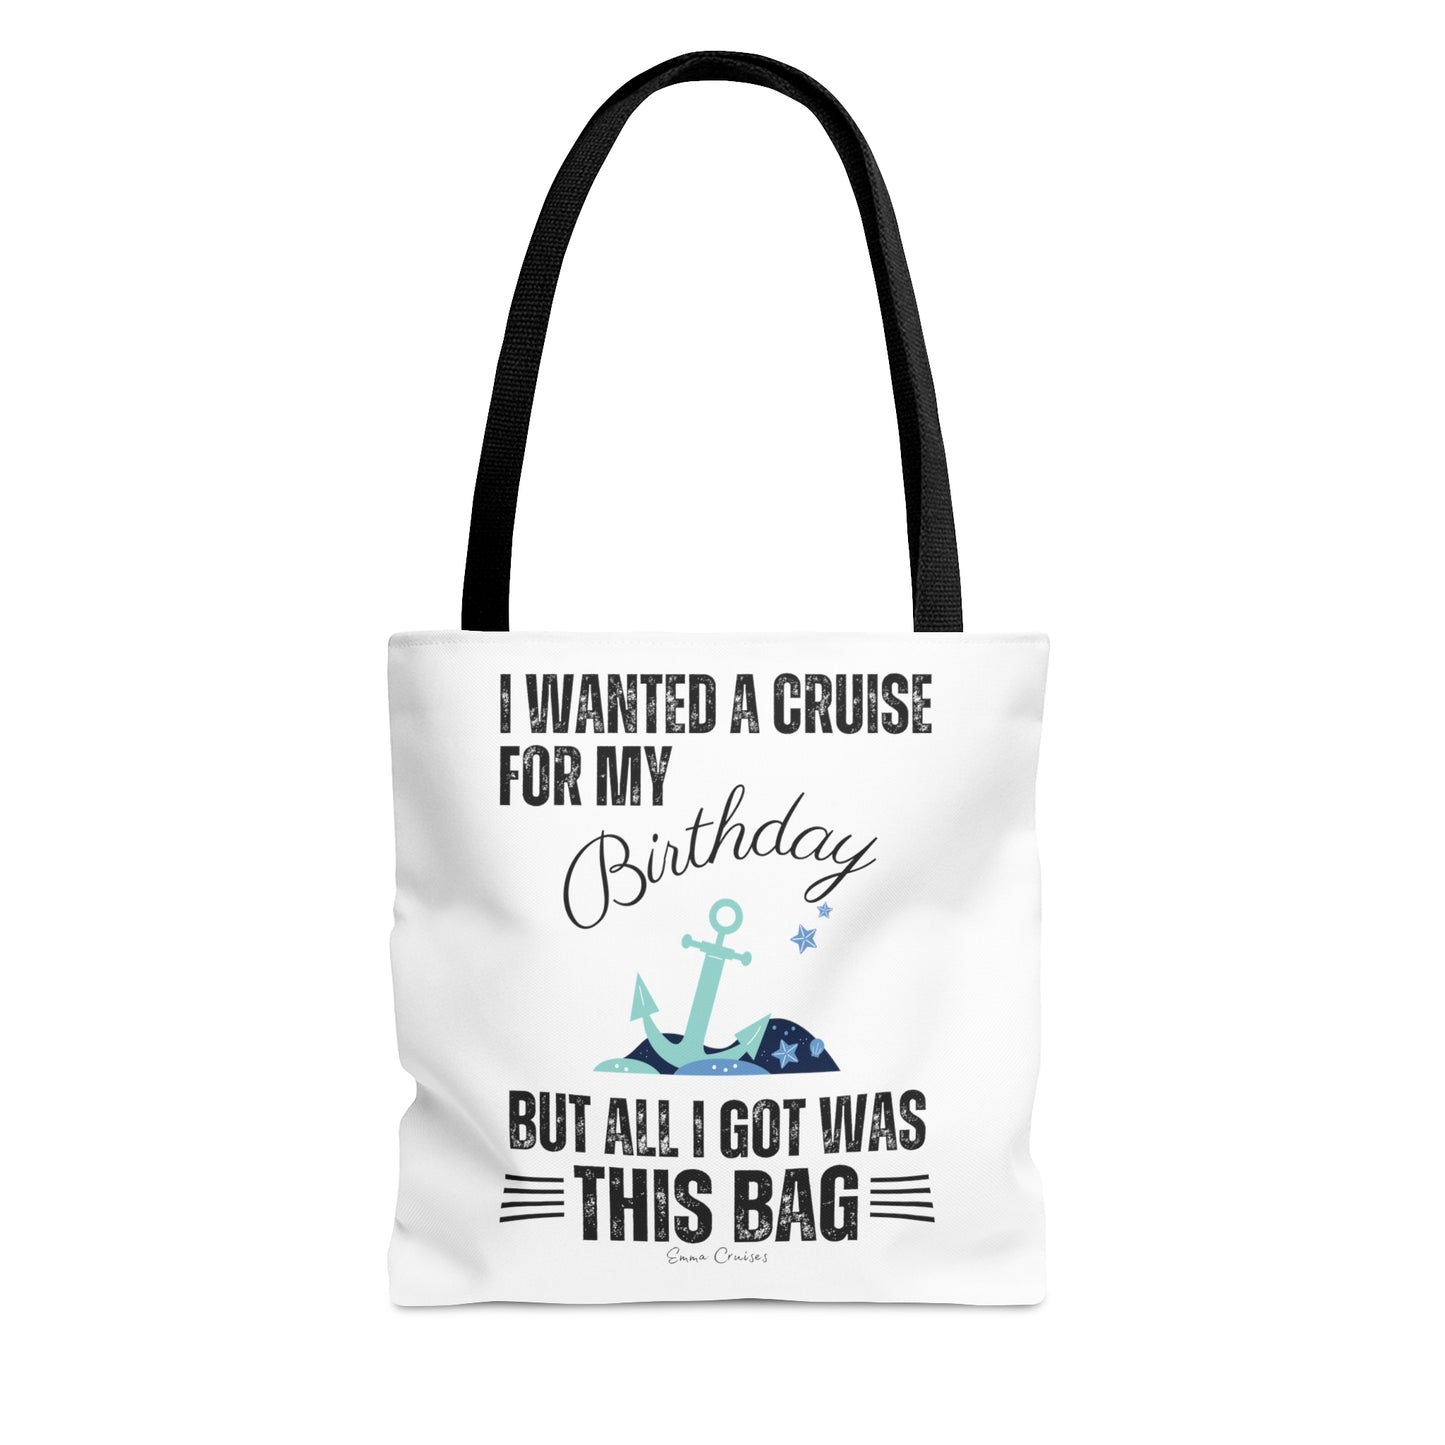 I Wanted a Cruise for My Birthday - Bag